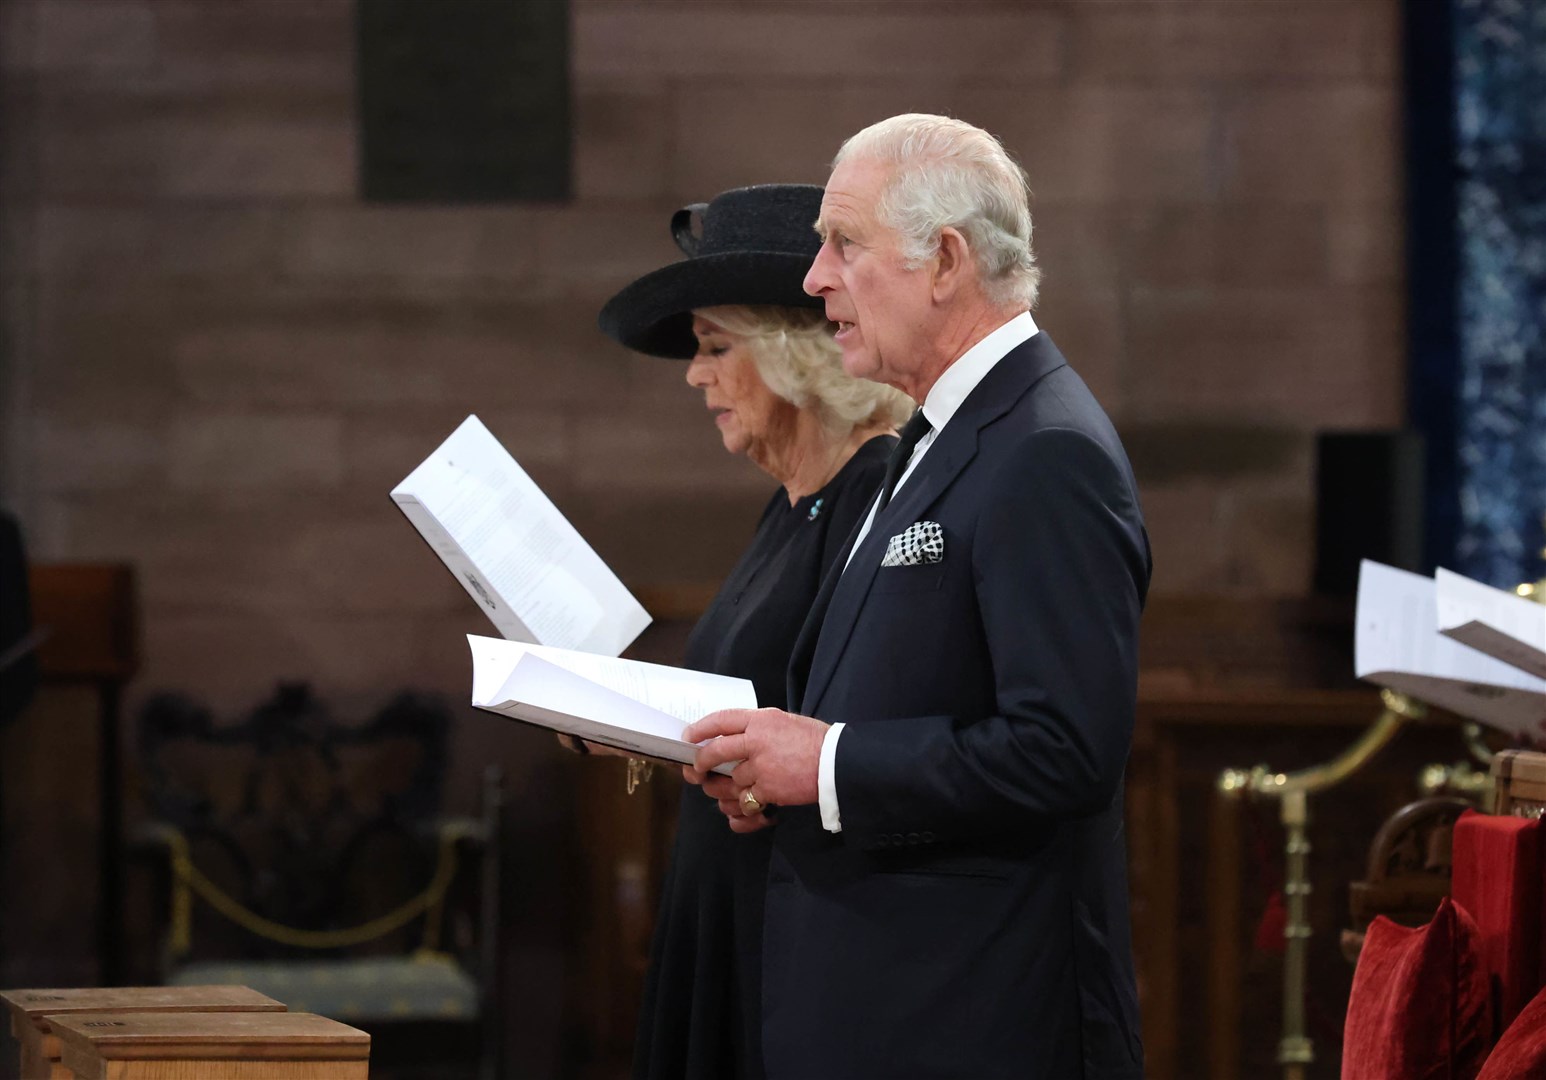 King Charles III and the Queen Consort attend a Service of Reflection at St Anne’s Cathedral in Belfast (Liam McBurney/PA)